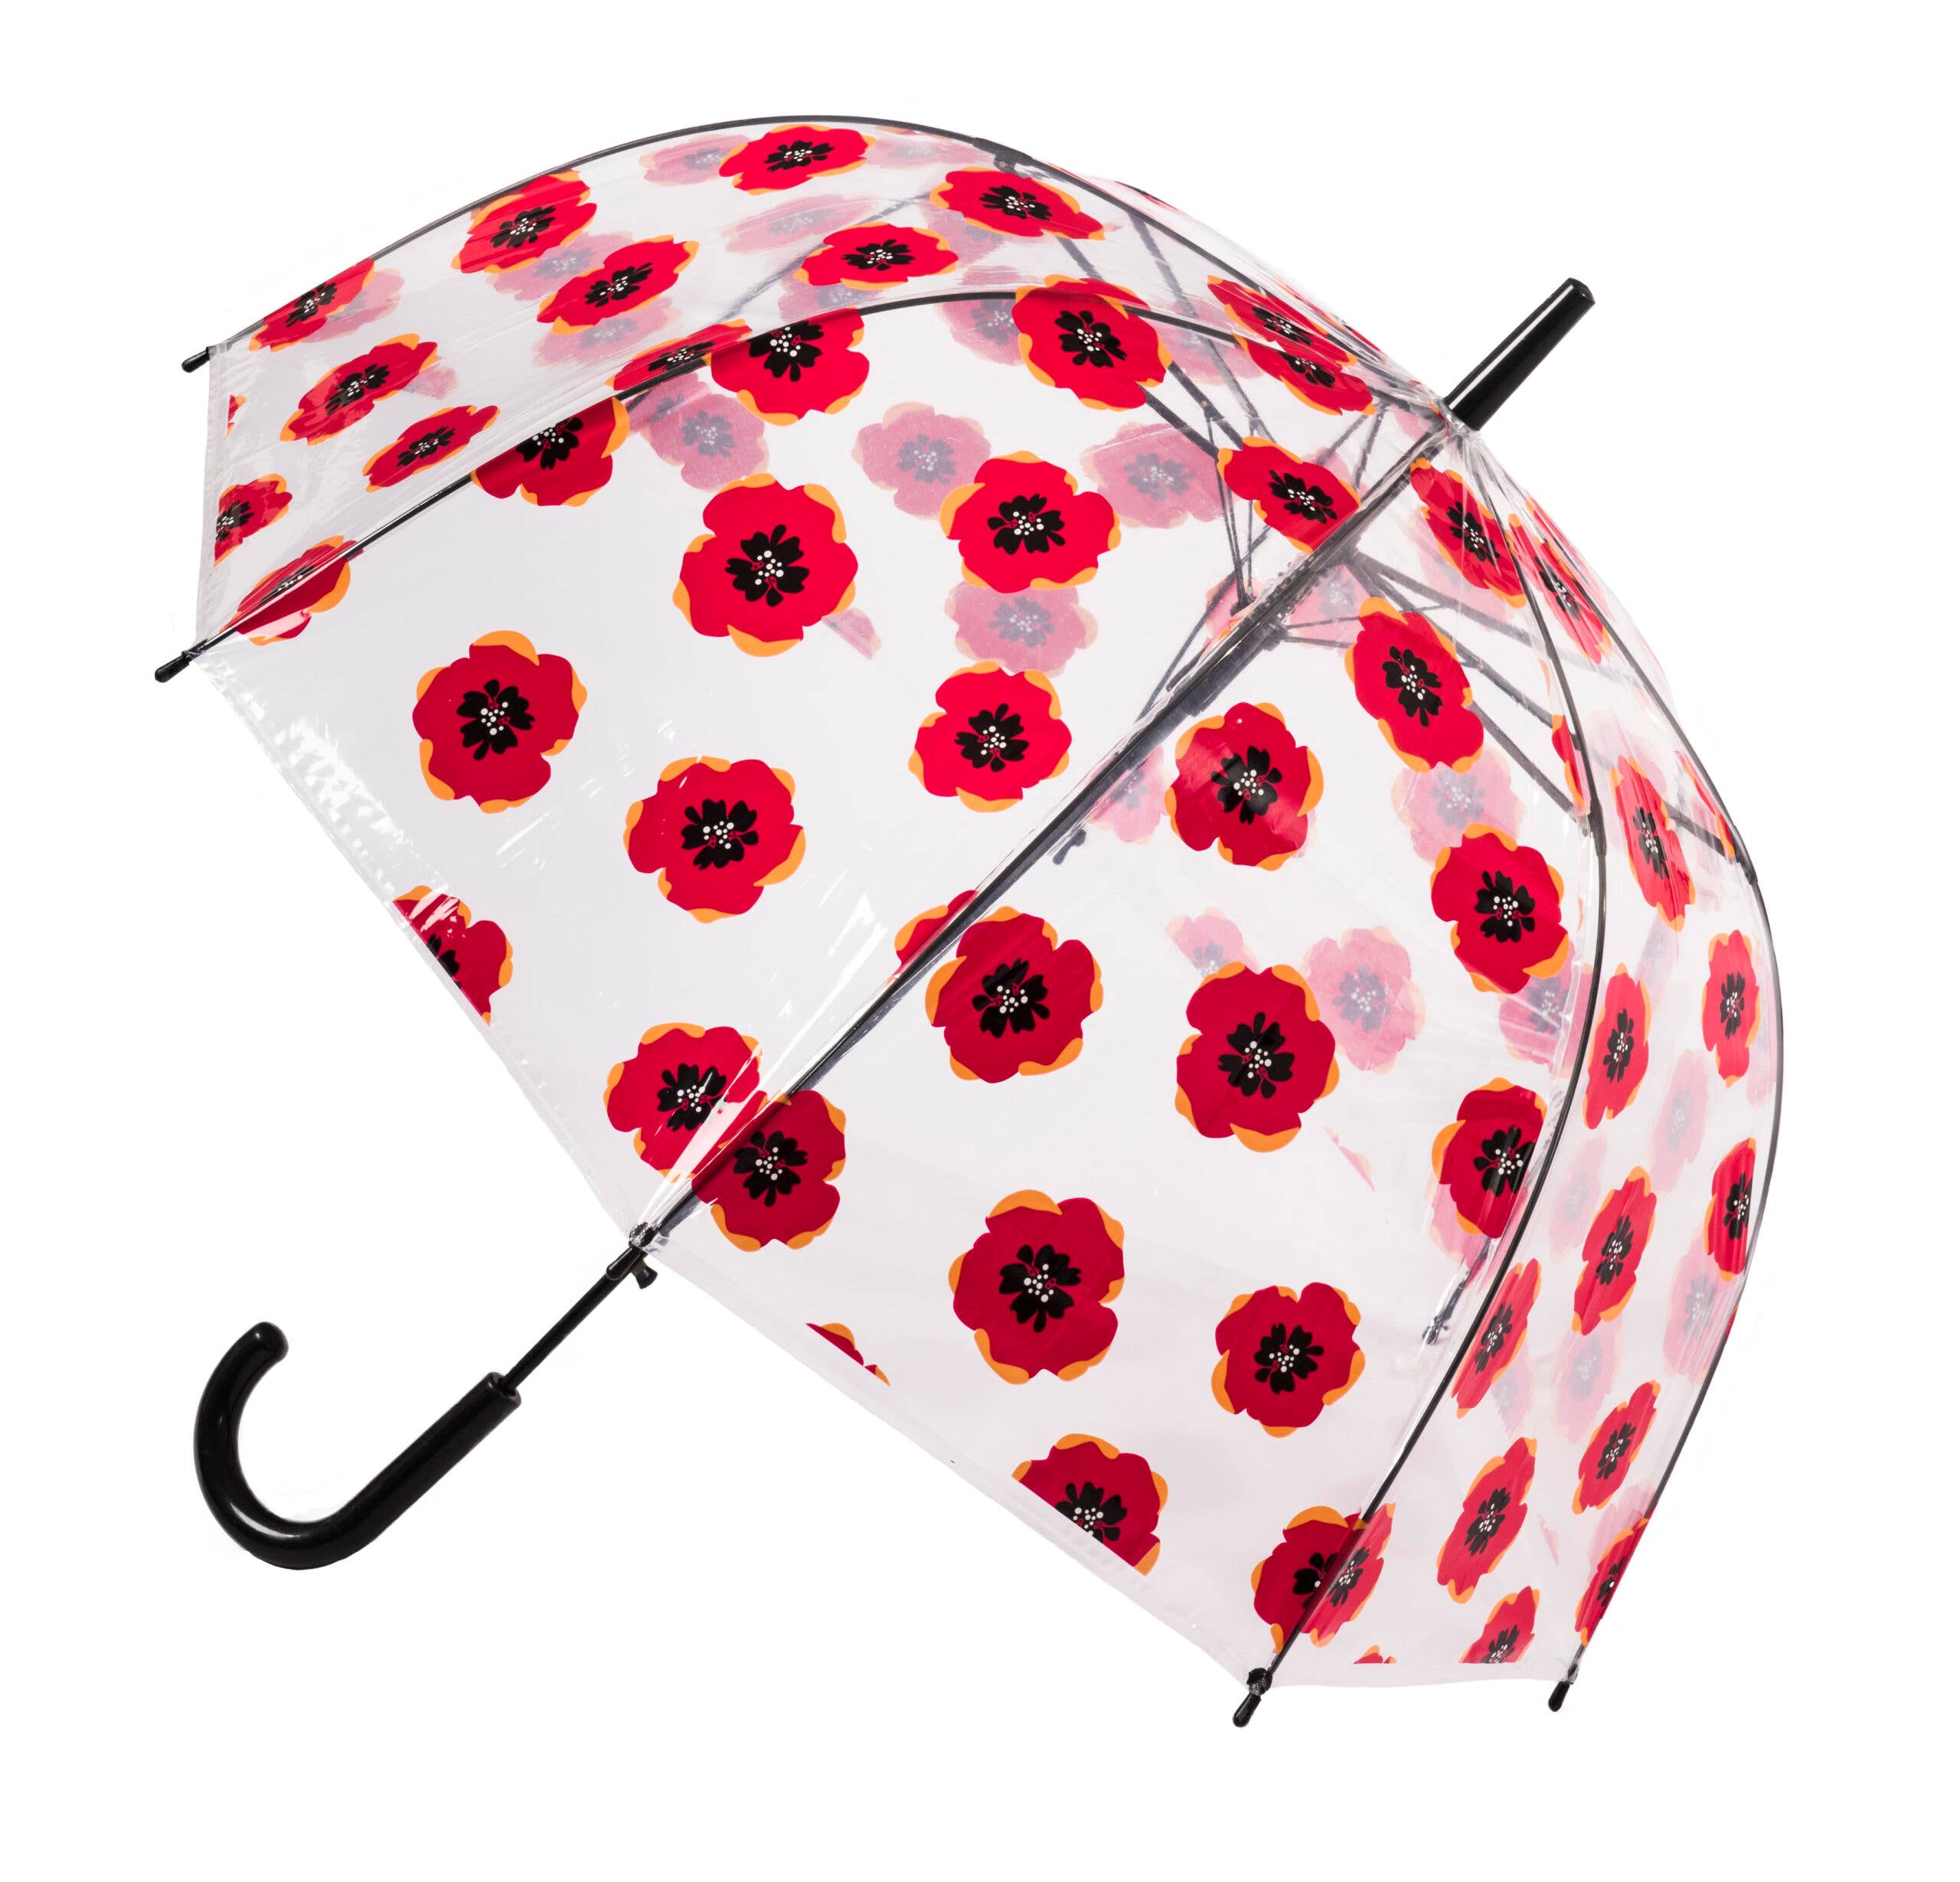 Clear Dome Stick Umbrella with a Poppy Design from the Soake